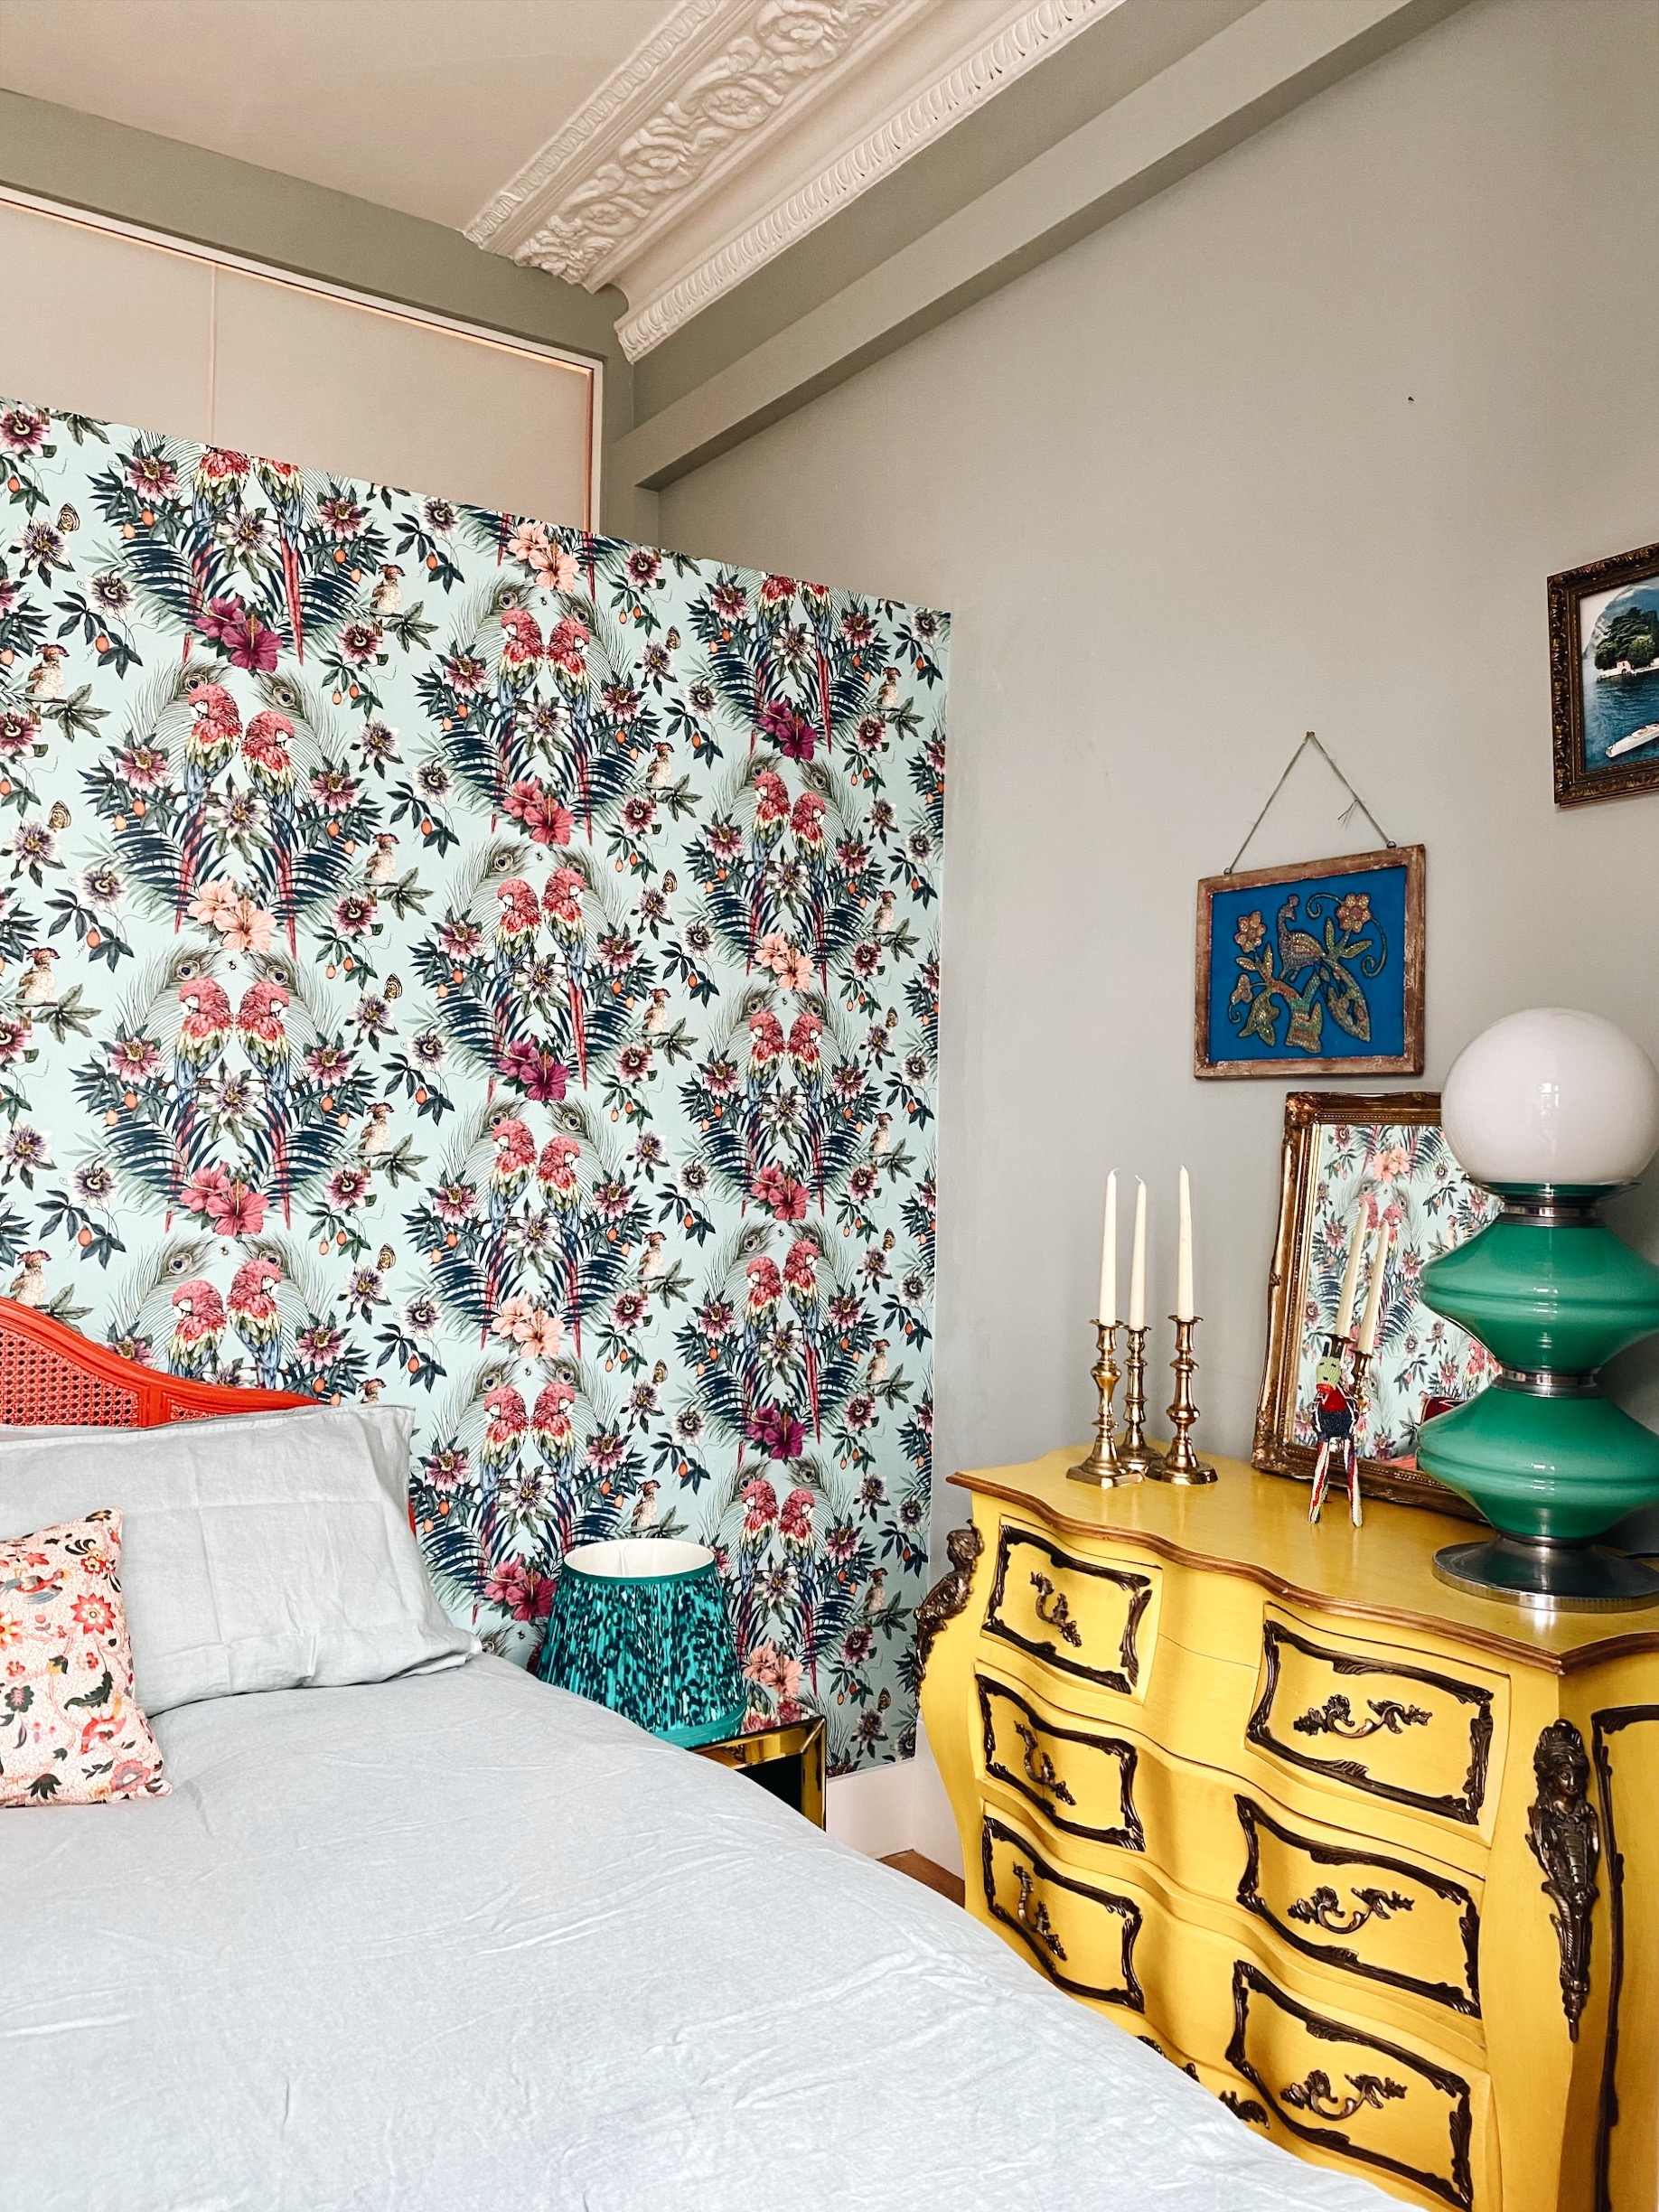 yellow painted vintage furniture in the home of Matthew Williamson with his own wallpaper design